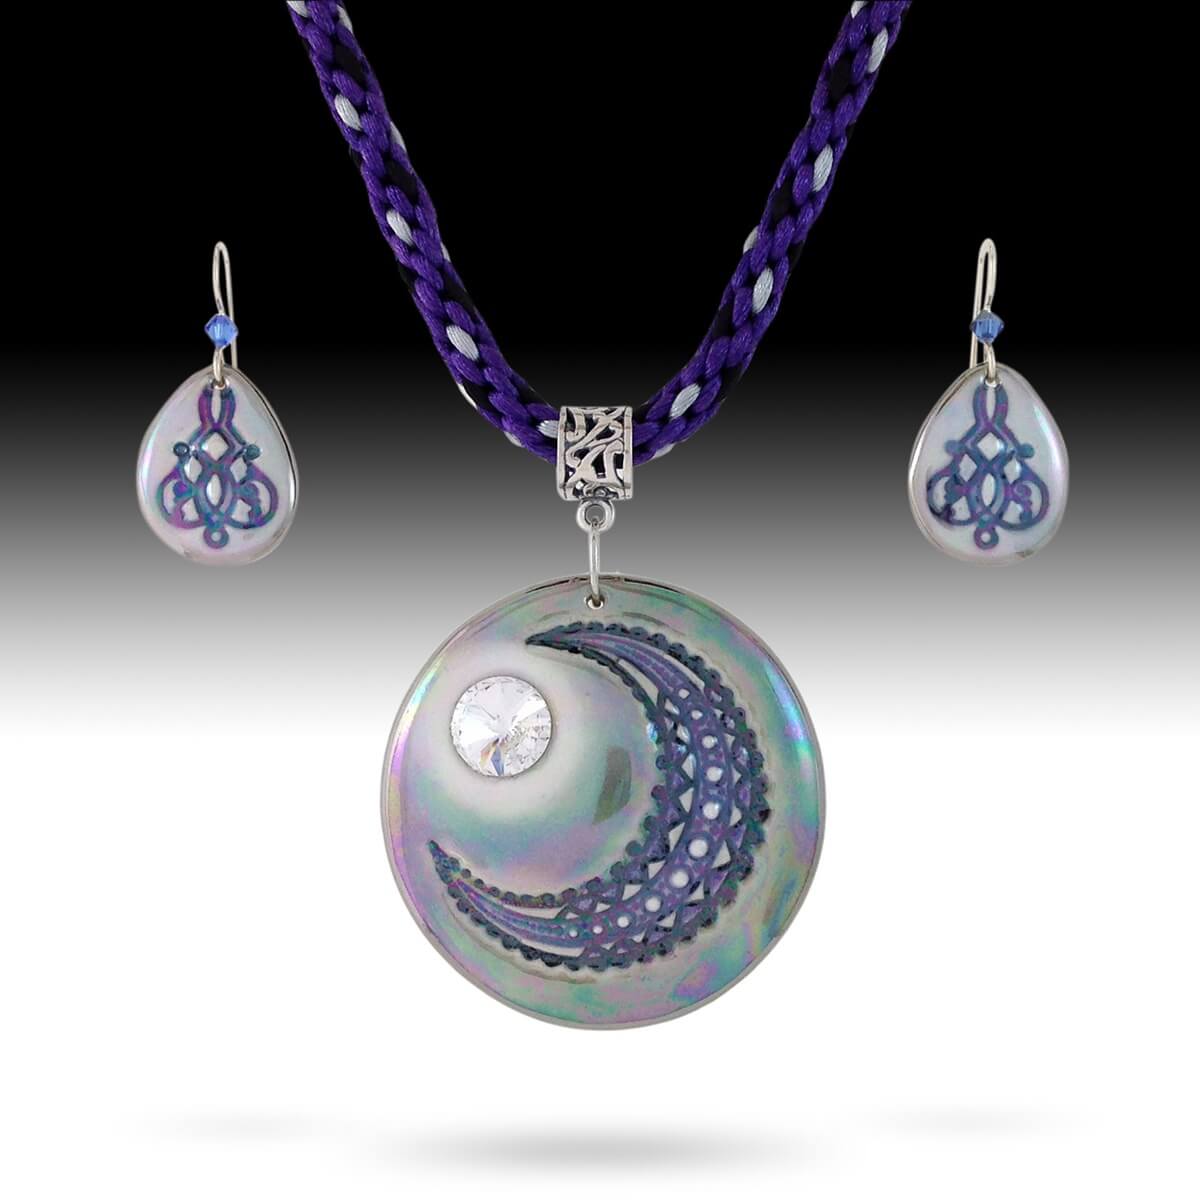 Filigree moon statement pendant displayed on an 8 strand Kumihimo braided necklace with coordinating earrings.